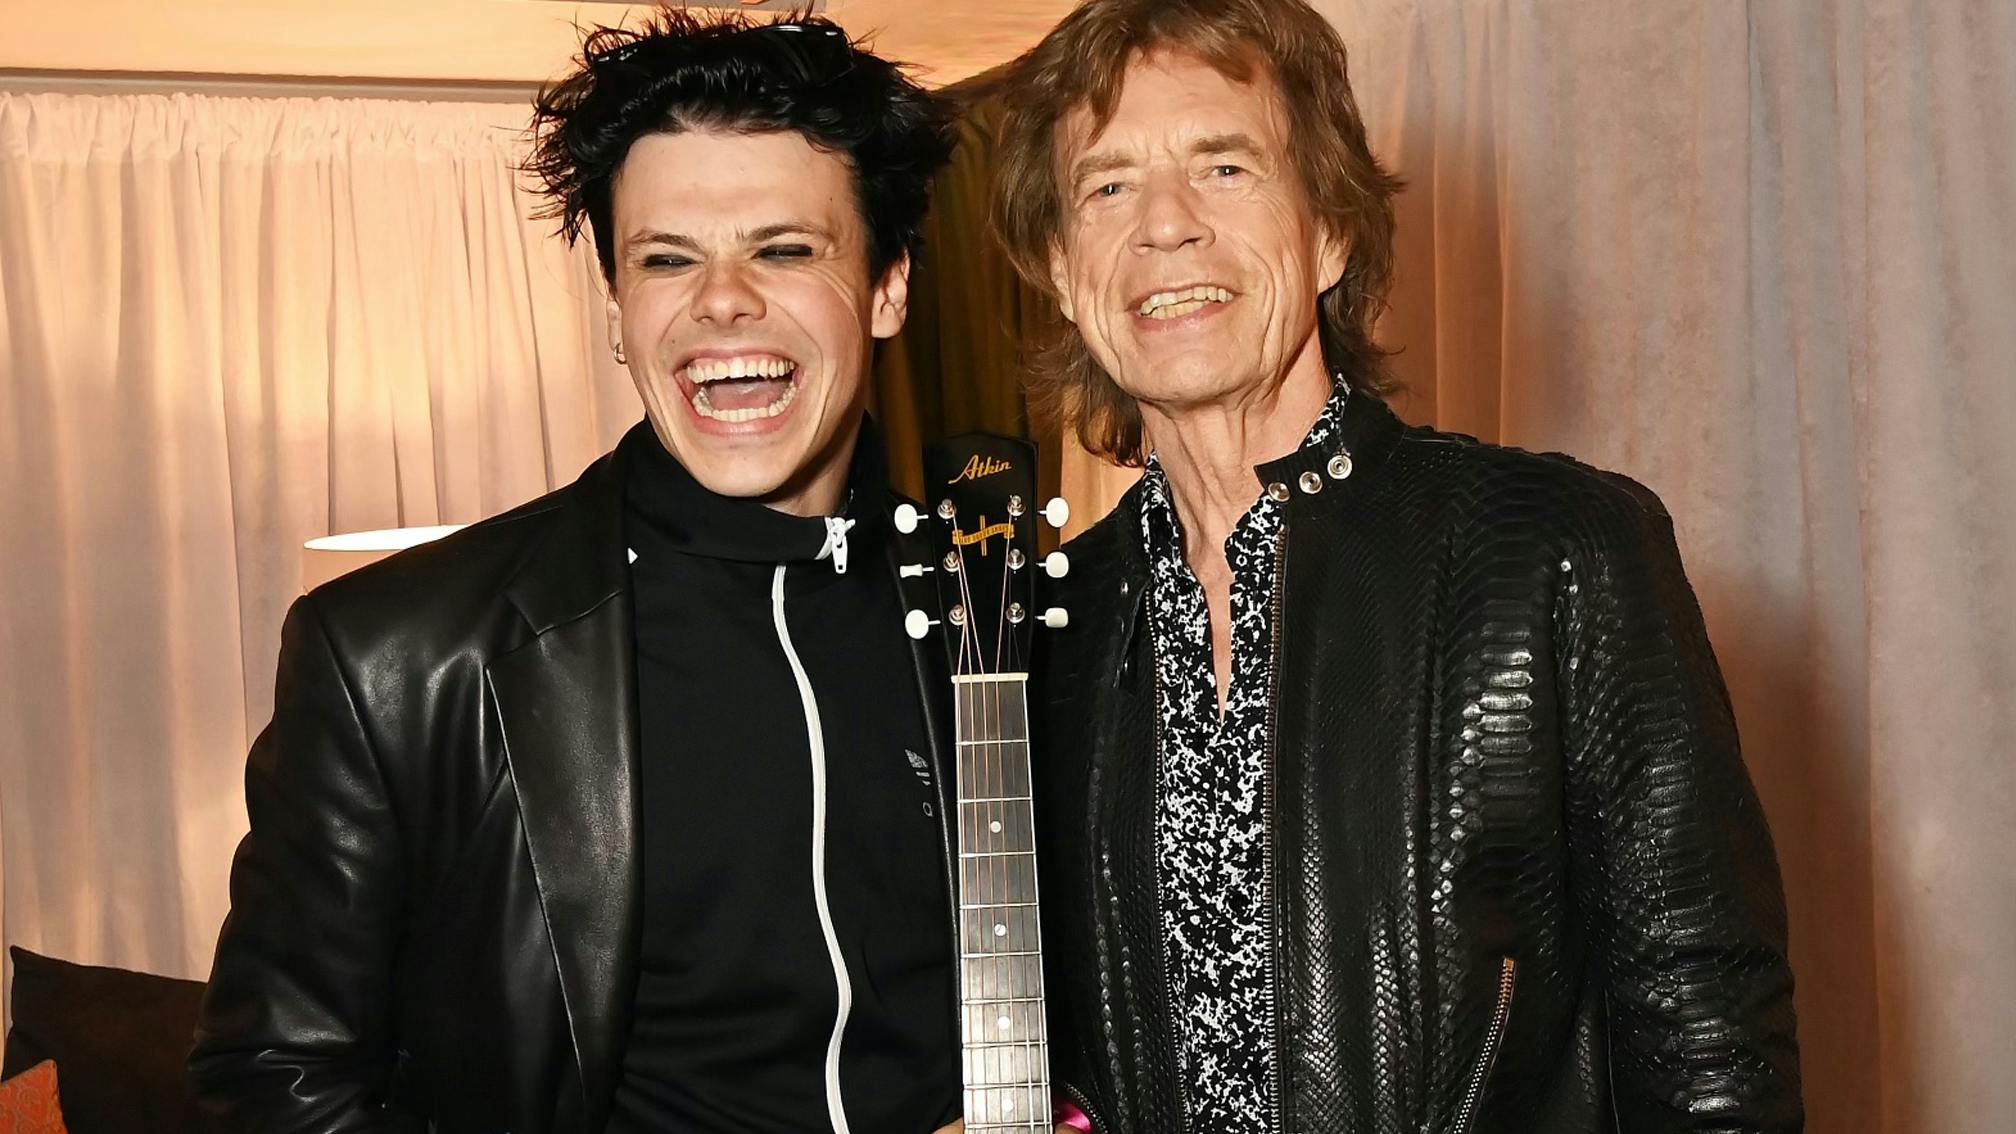 Mick Jagger gifted YUNGBLUD with a Buddy Holly-inspired guitar